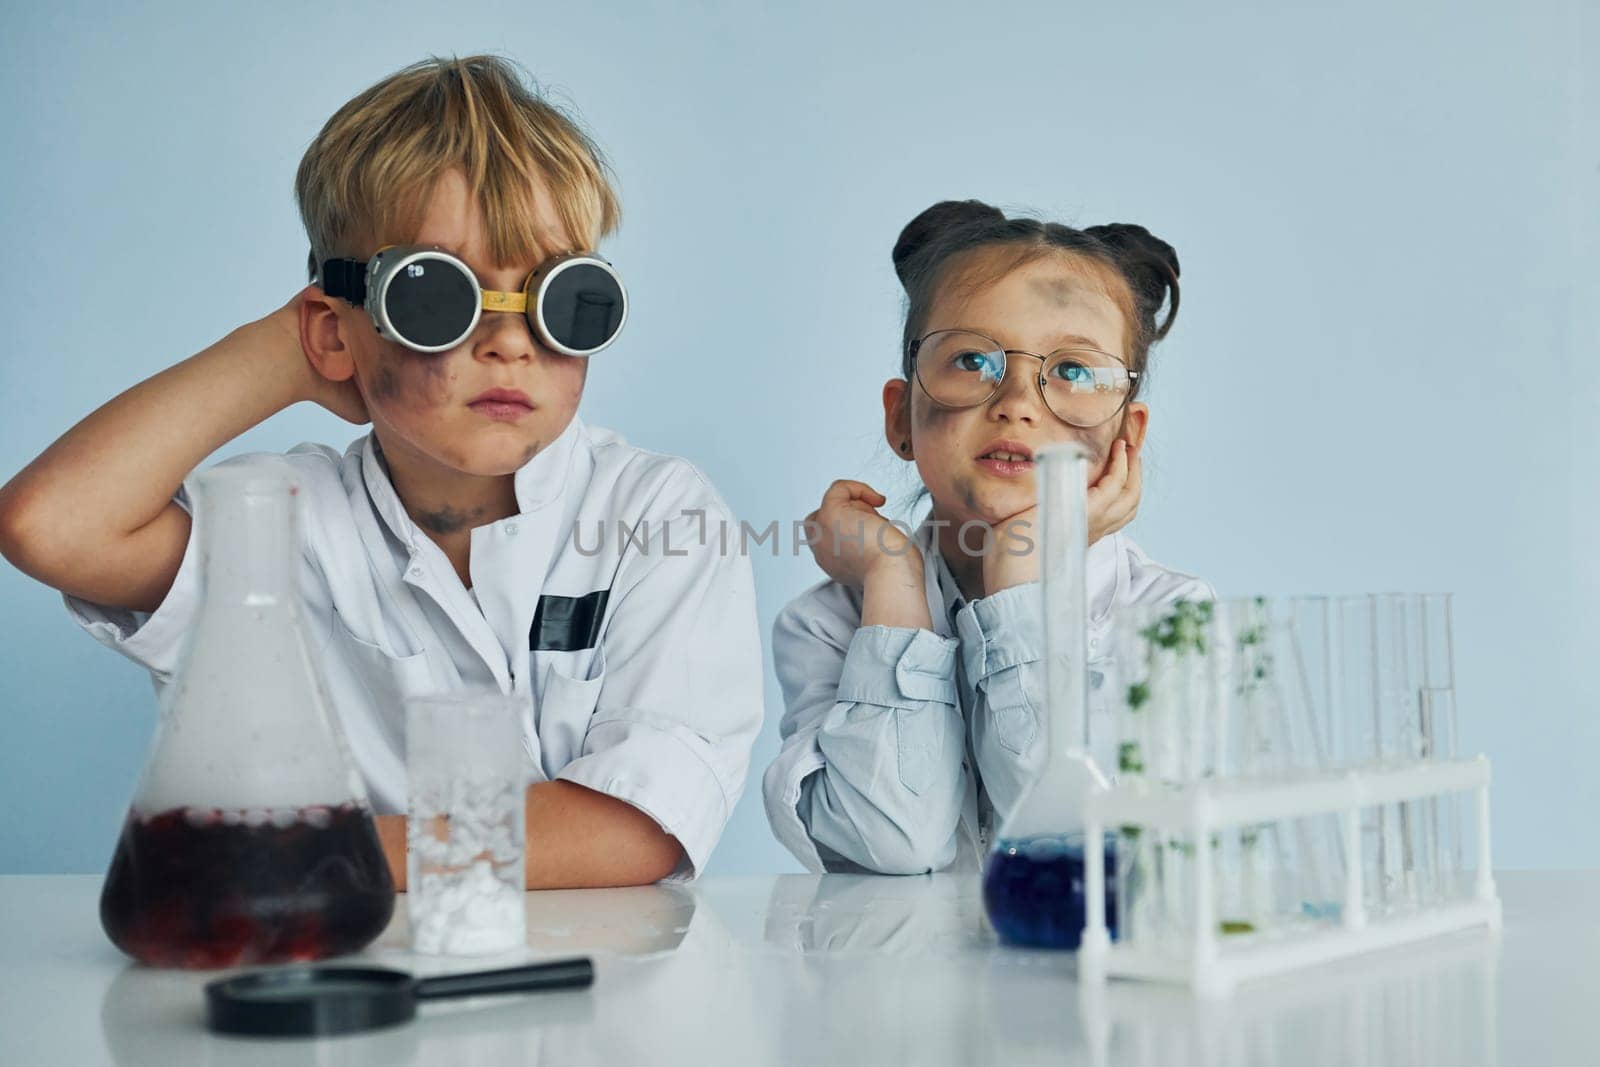 Girl with boy working together. Children in white coats plays a scientists in lab by using equipment by Standret